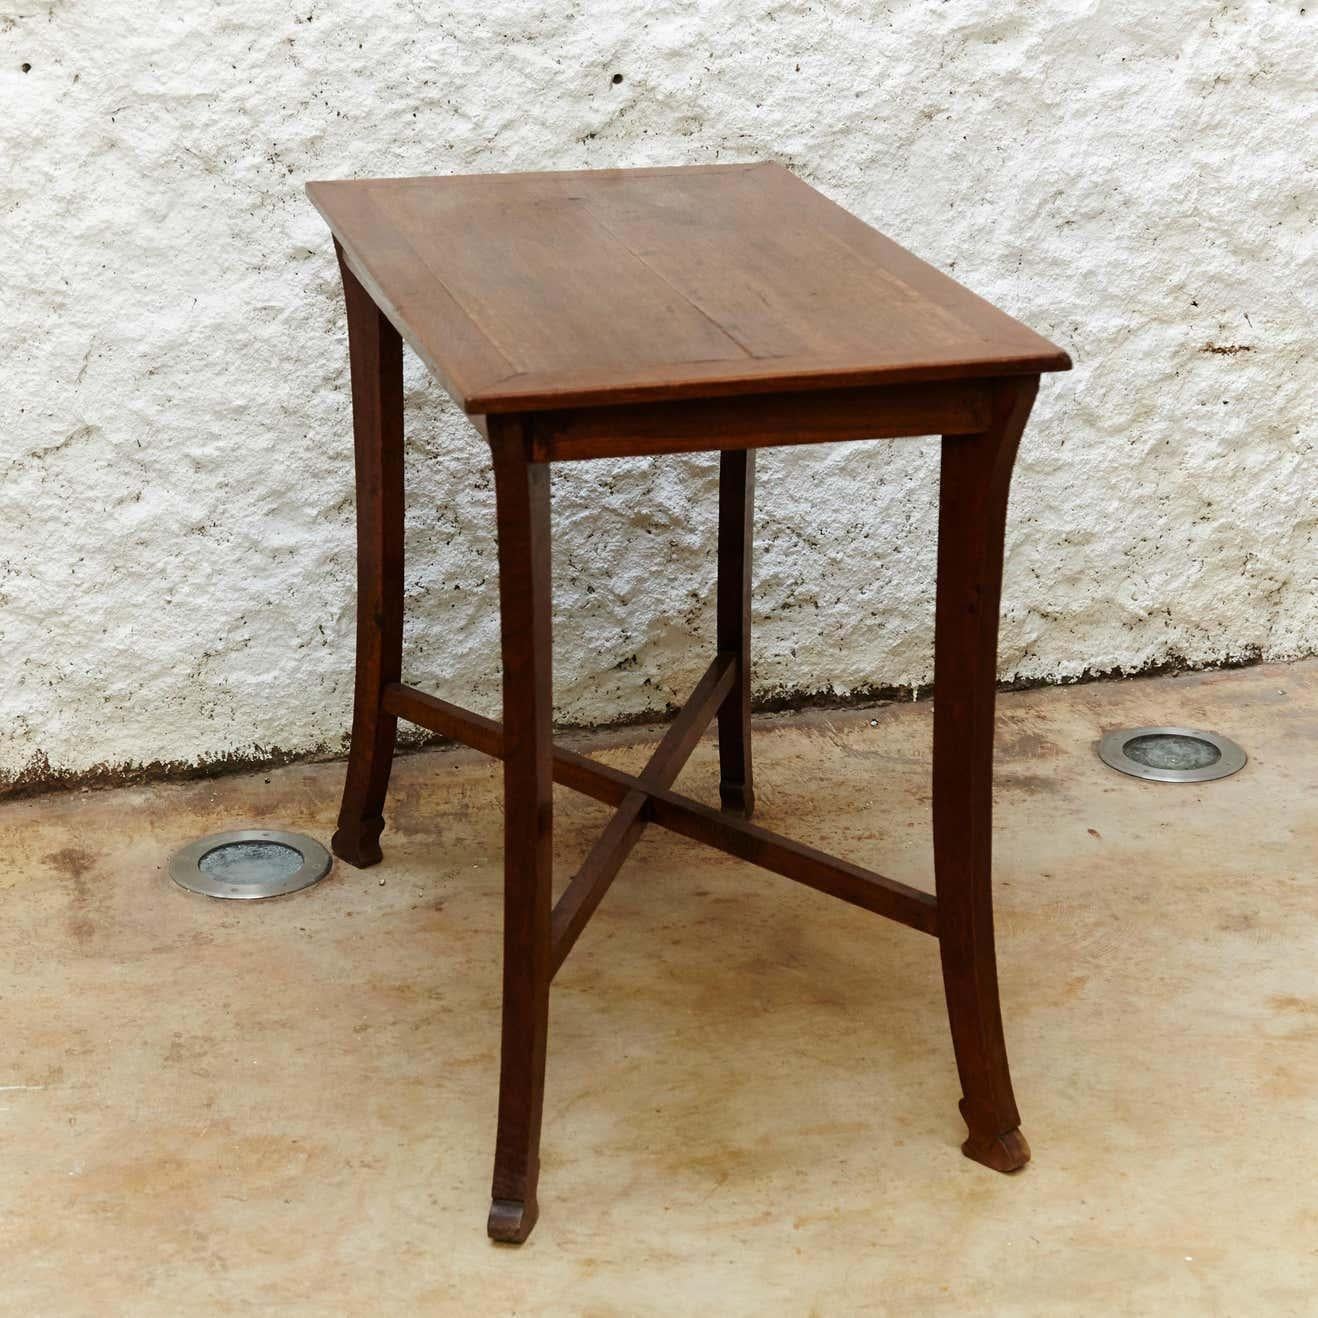 Modernist Oakwood Thonet Table, circa 1930 In Fair Condition For Sale In Barcelona, Barcelona